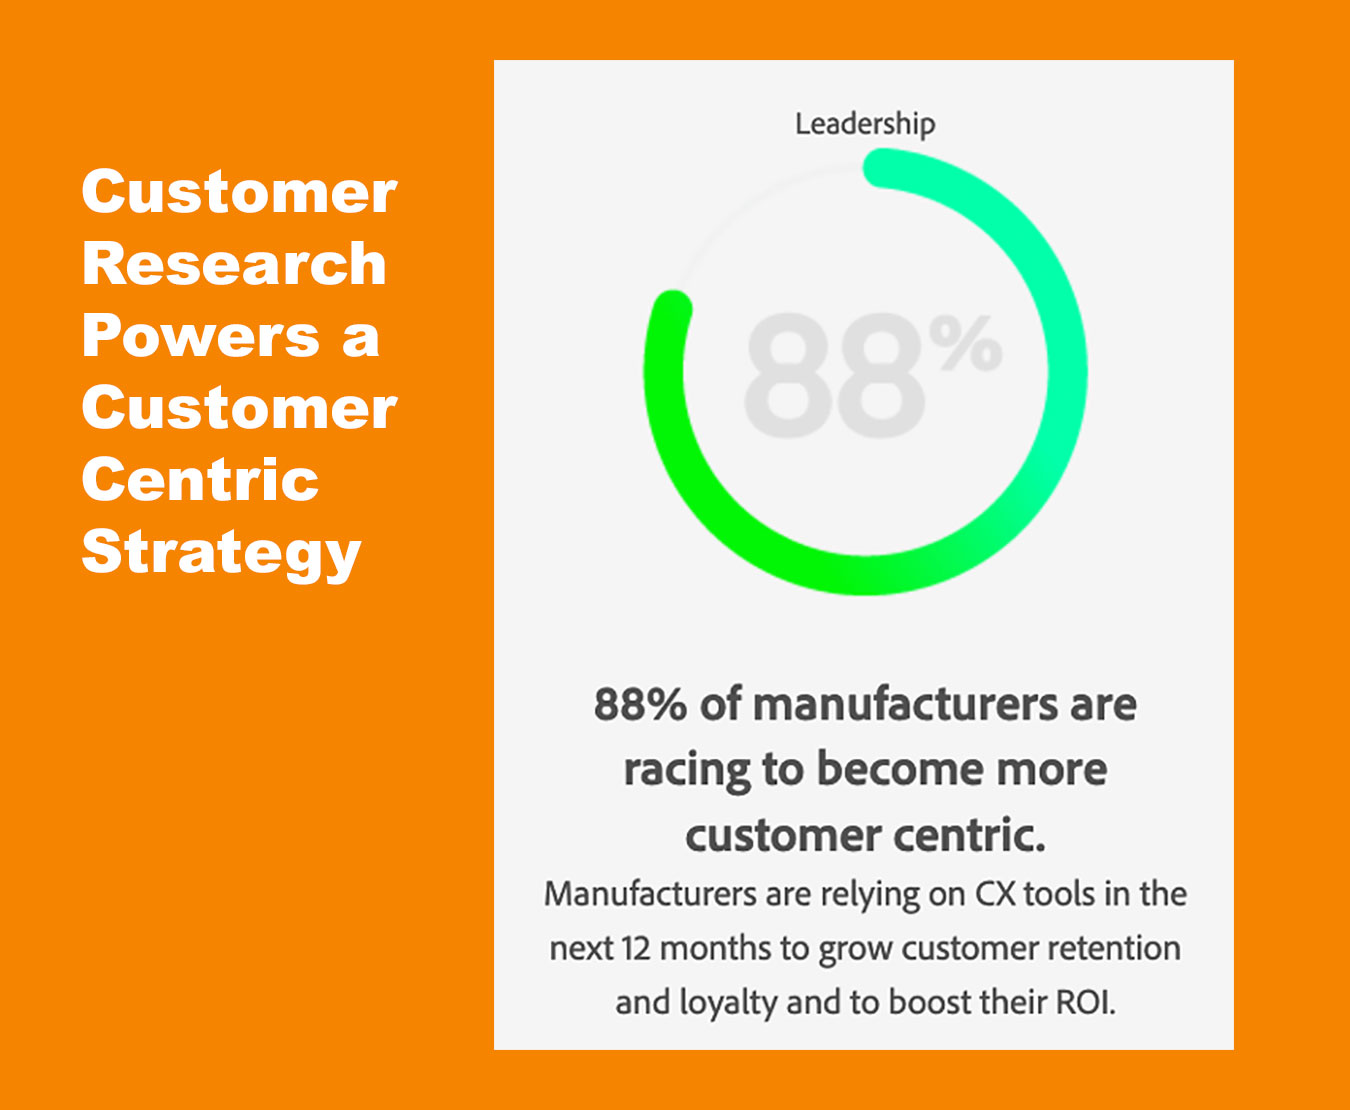 manufacturing marketing customer research will support the 88% of manufacturers focused on a more customer-centric approach